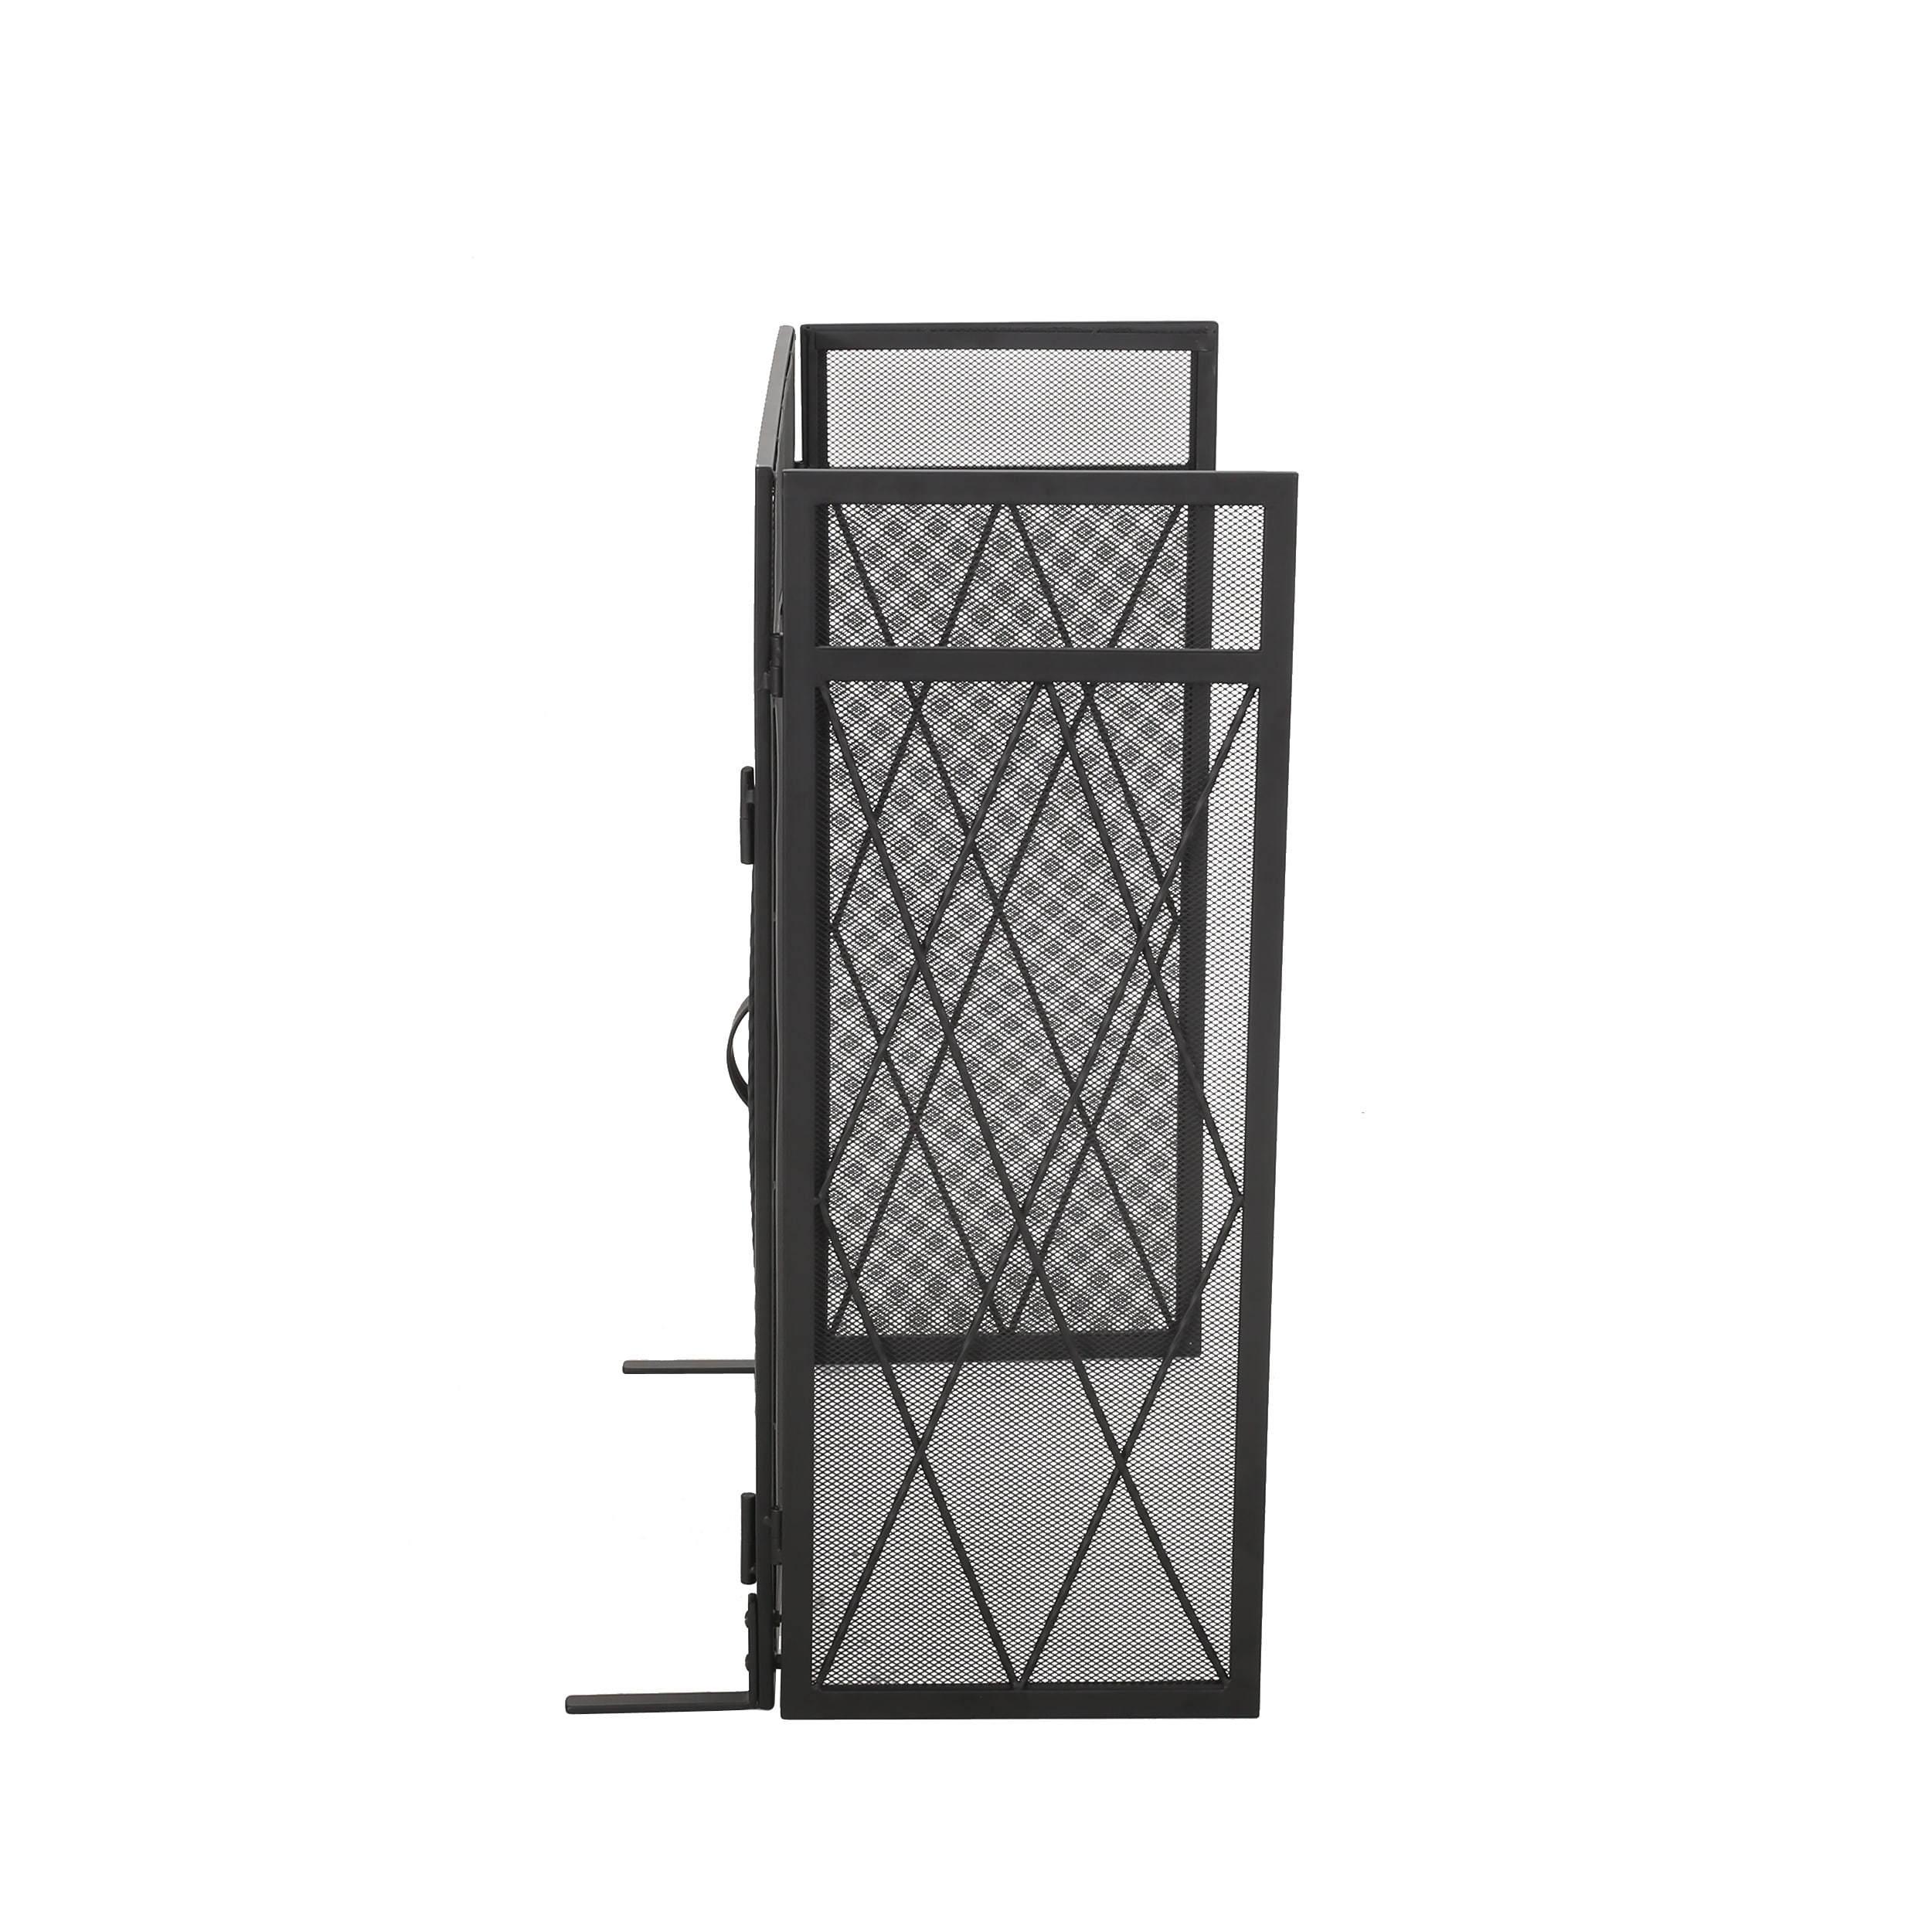 Blyfield Modern Iron Folding Fireplace Screen with Door by Christopher  Knight Home On Sale Bed Bath  Beyond 30355197